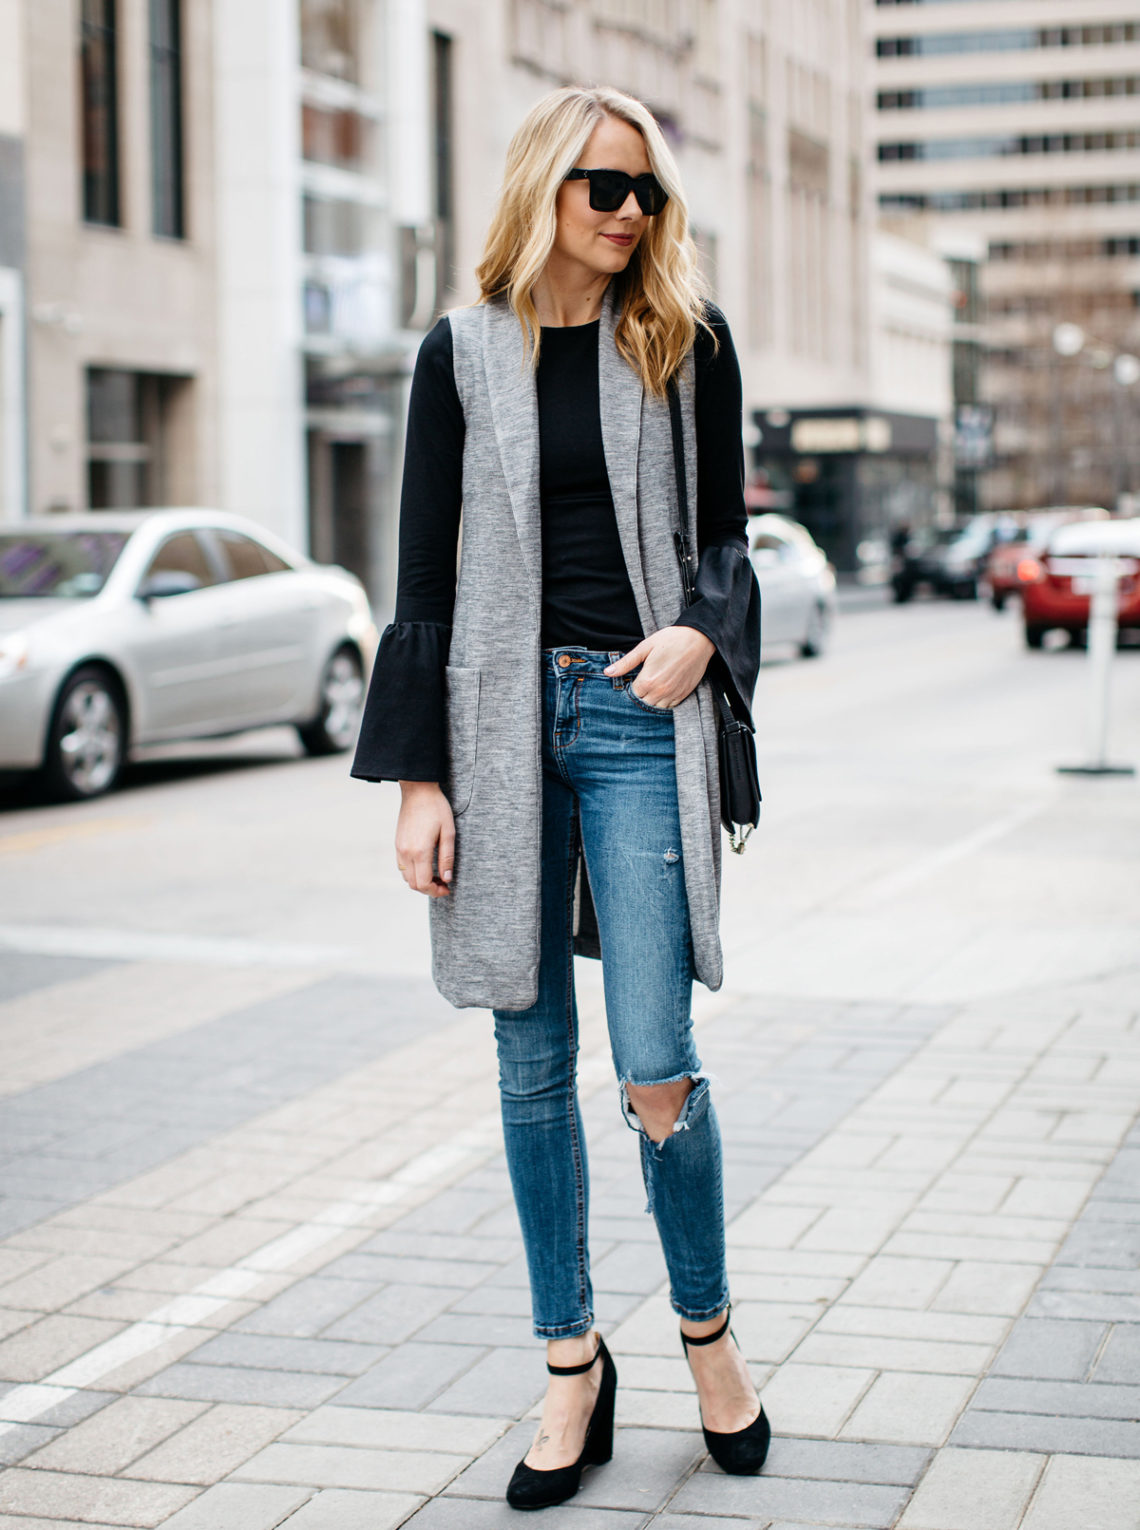 Fall Outfit, Winter Outfit, Long Grey Vest, Black Bell Sleeve Top, Chloe Faye Handbag, Denim Ripped Skinny Jeans, Black Ankle Strap Pumps